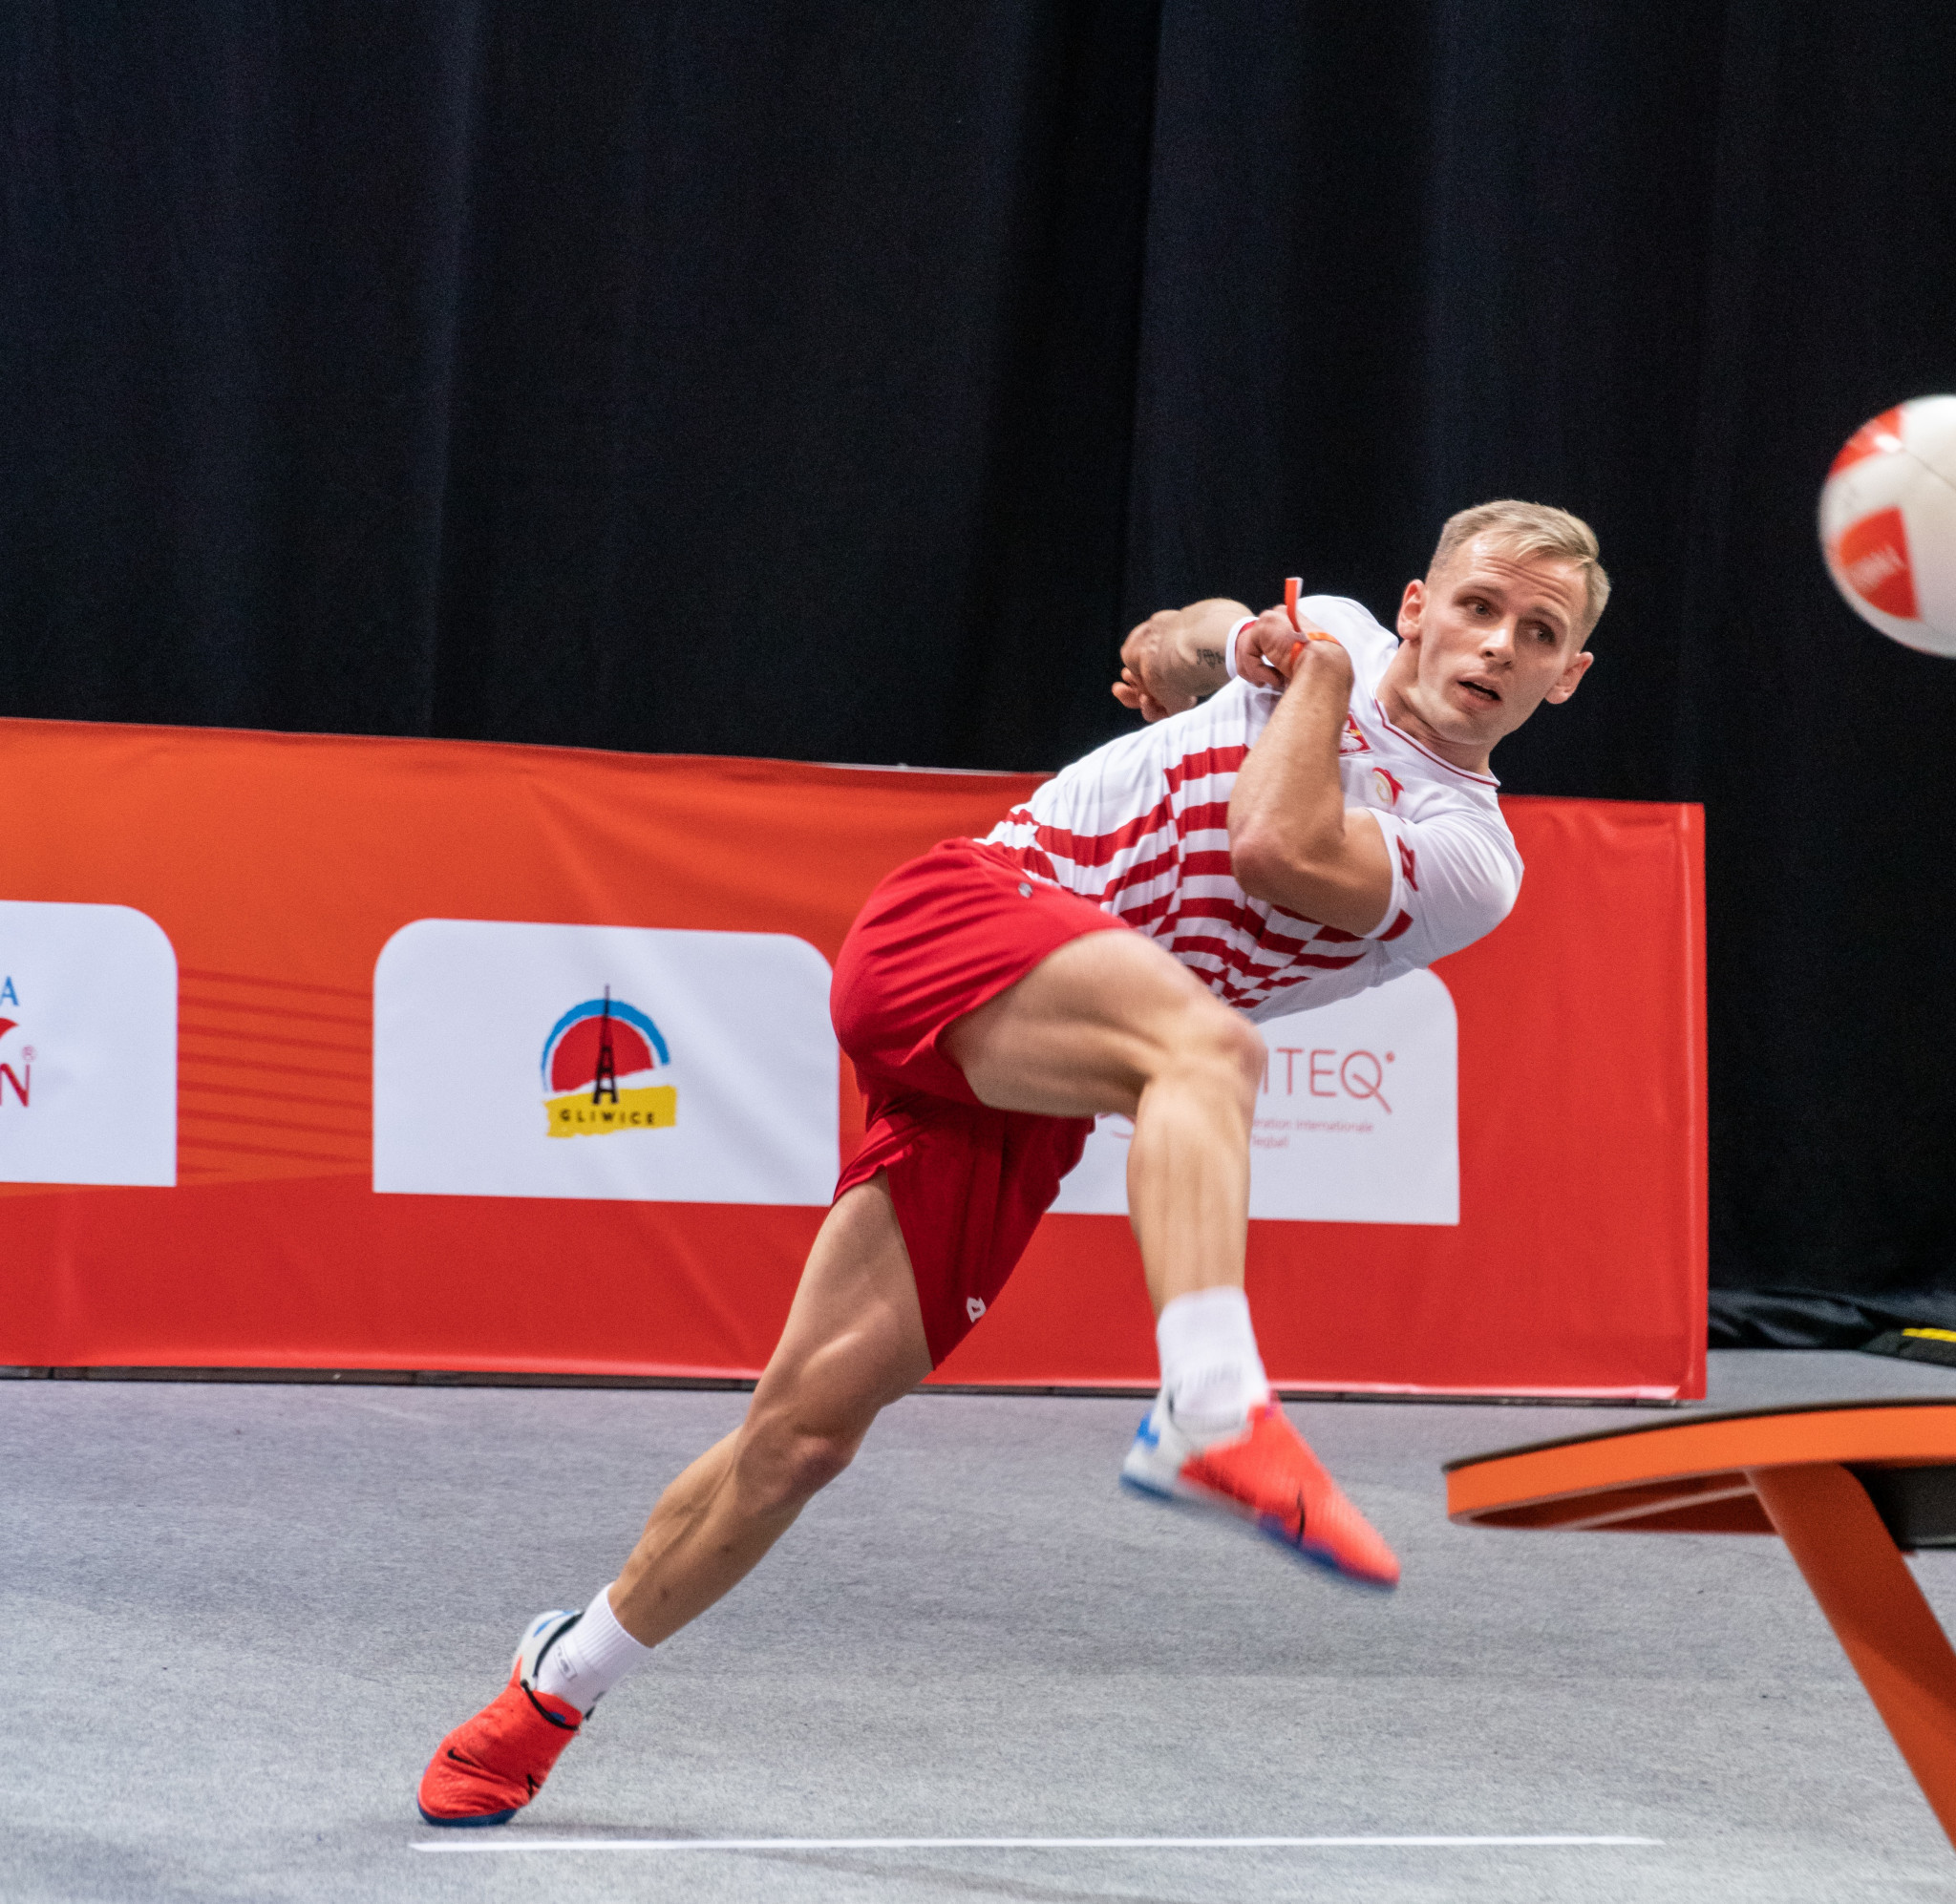 Last year's Teqball World Championships were staged in Poland, with Kraków and the regions of Małopolska and Śląsk set to host the 2023 European Games ©FITEQ